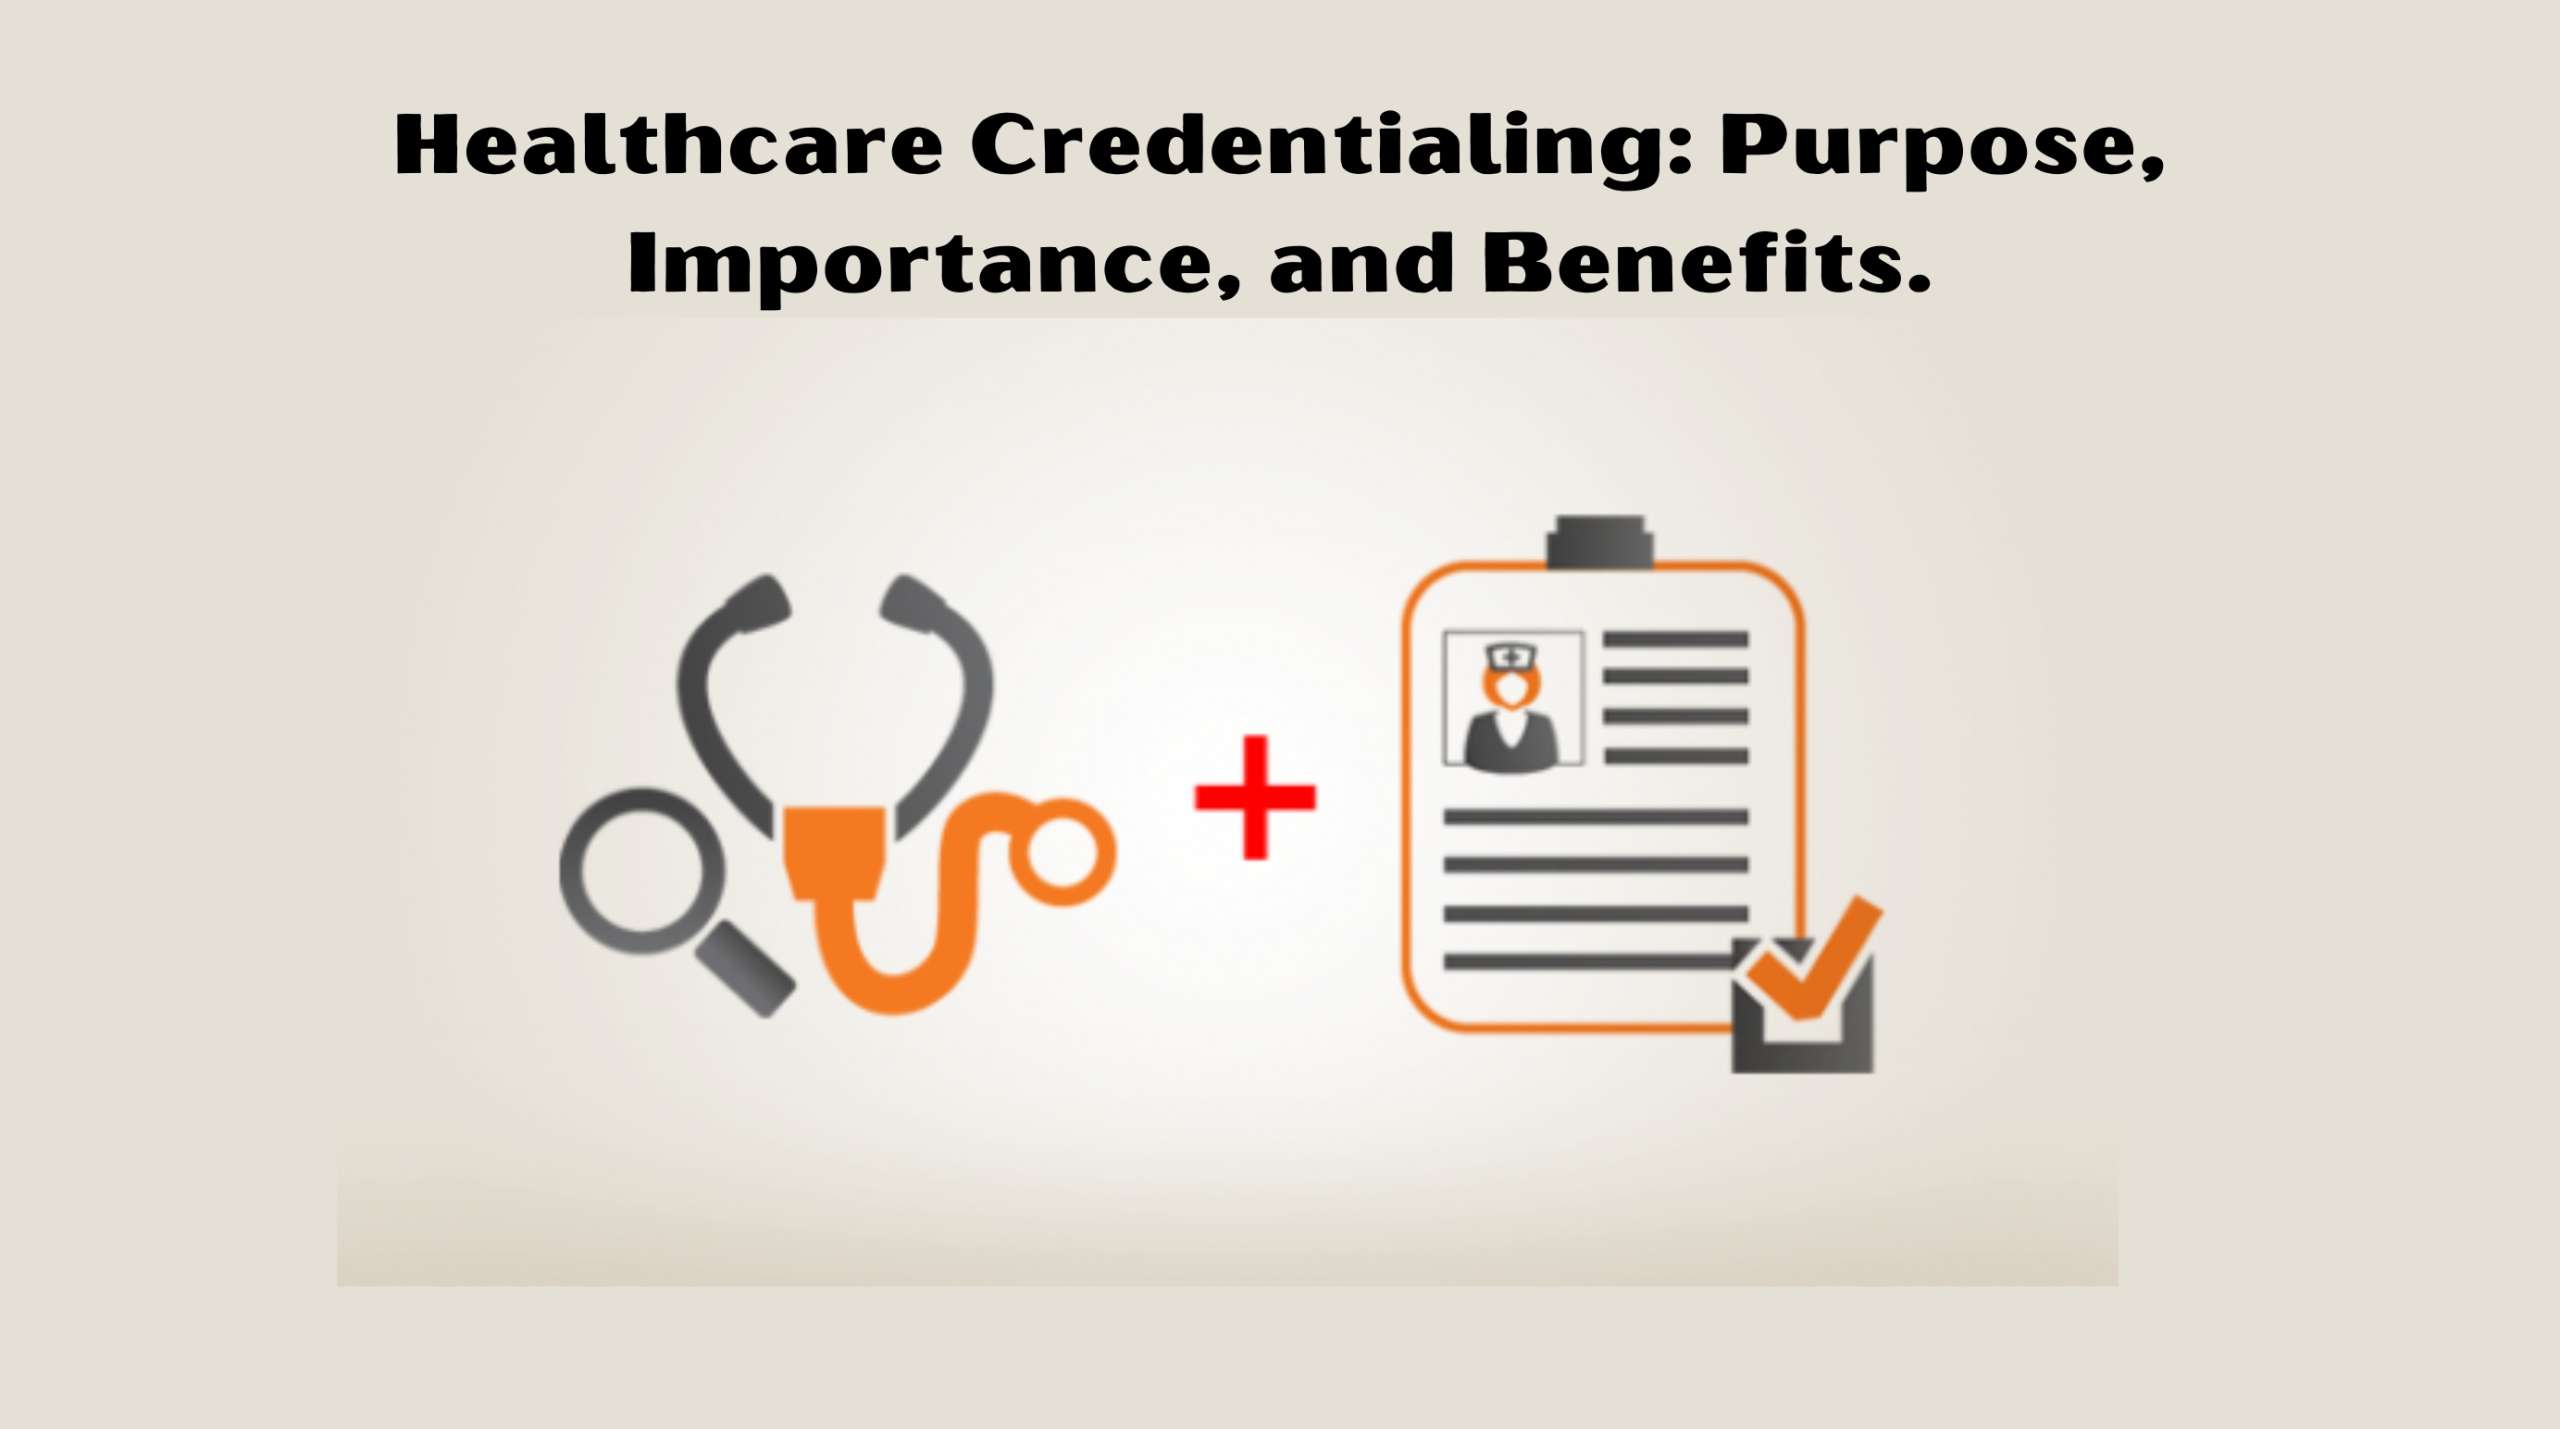 Healthcare Credentialing: Purpose, Importance, and Benefits.